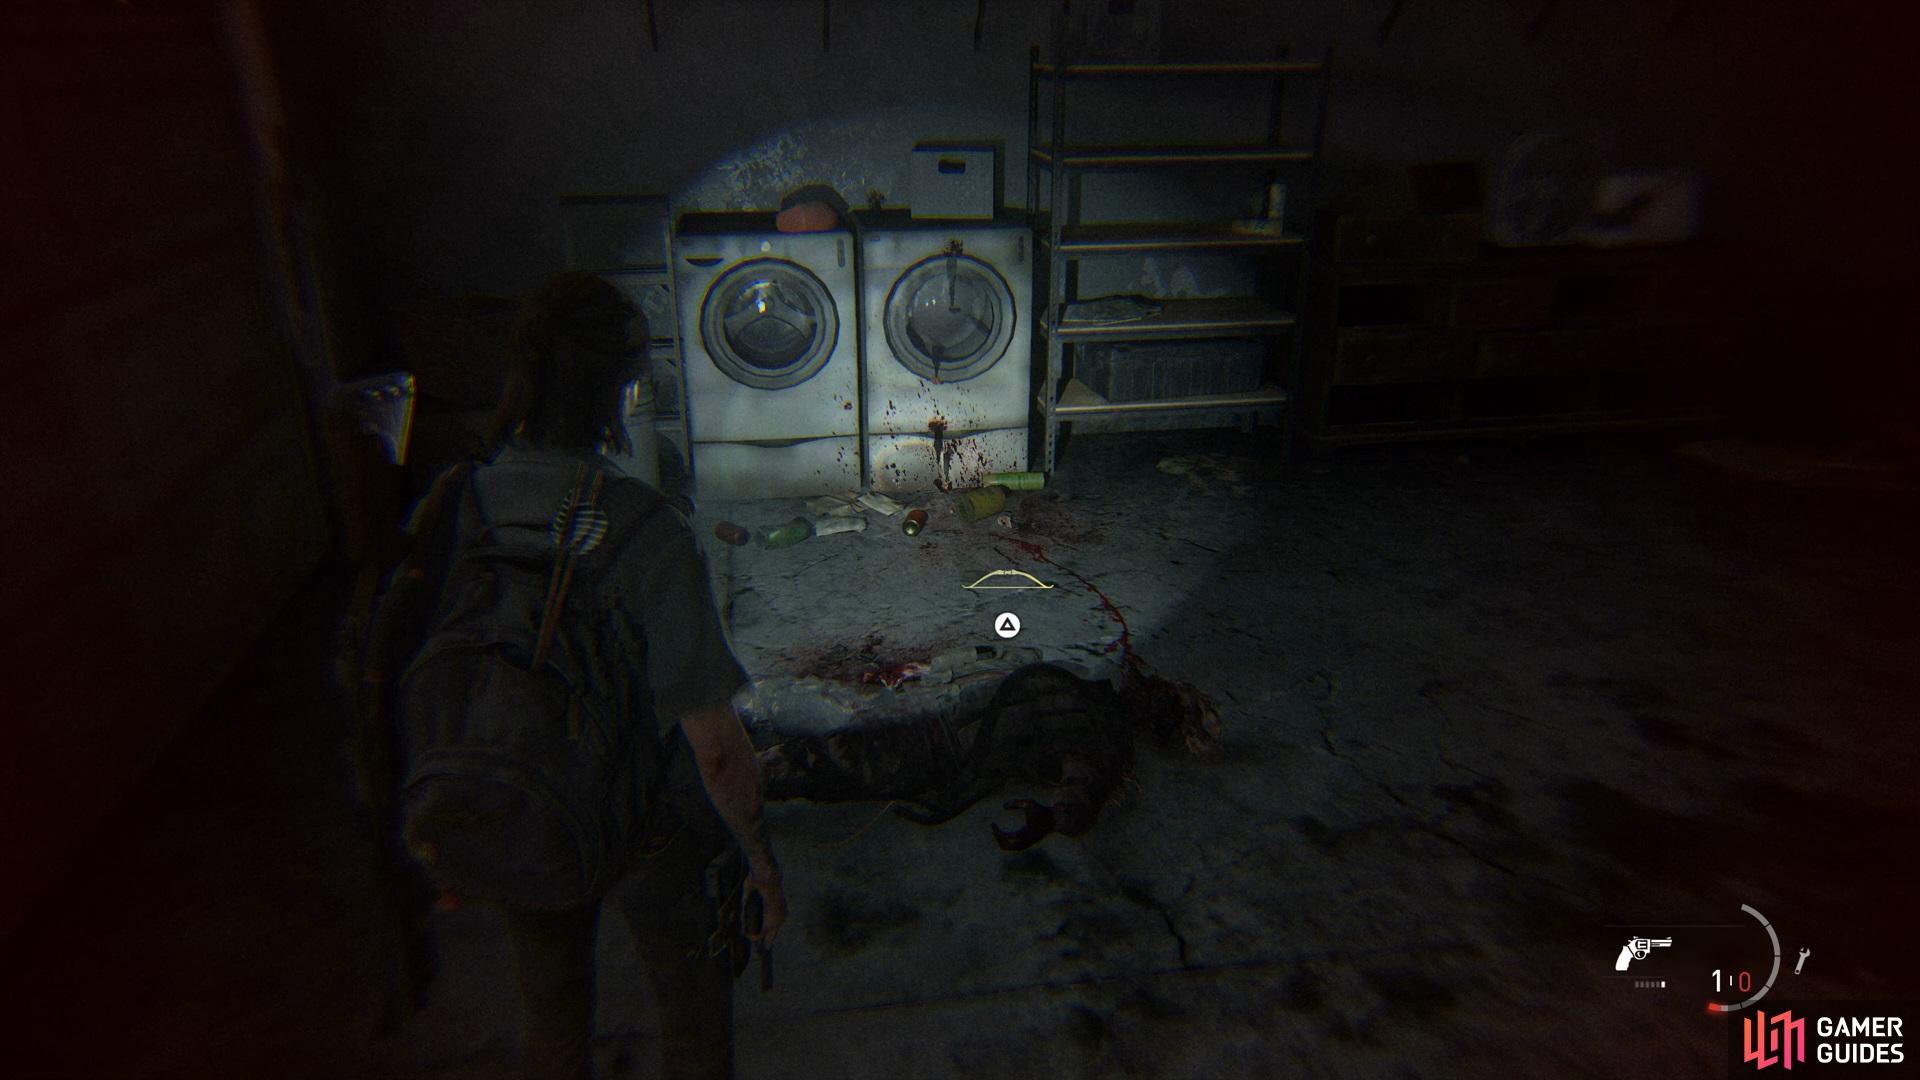 then collect the bow from the recently killed infected.